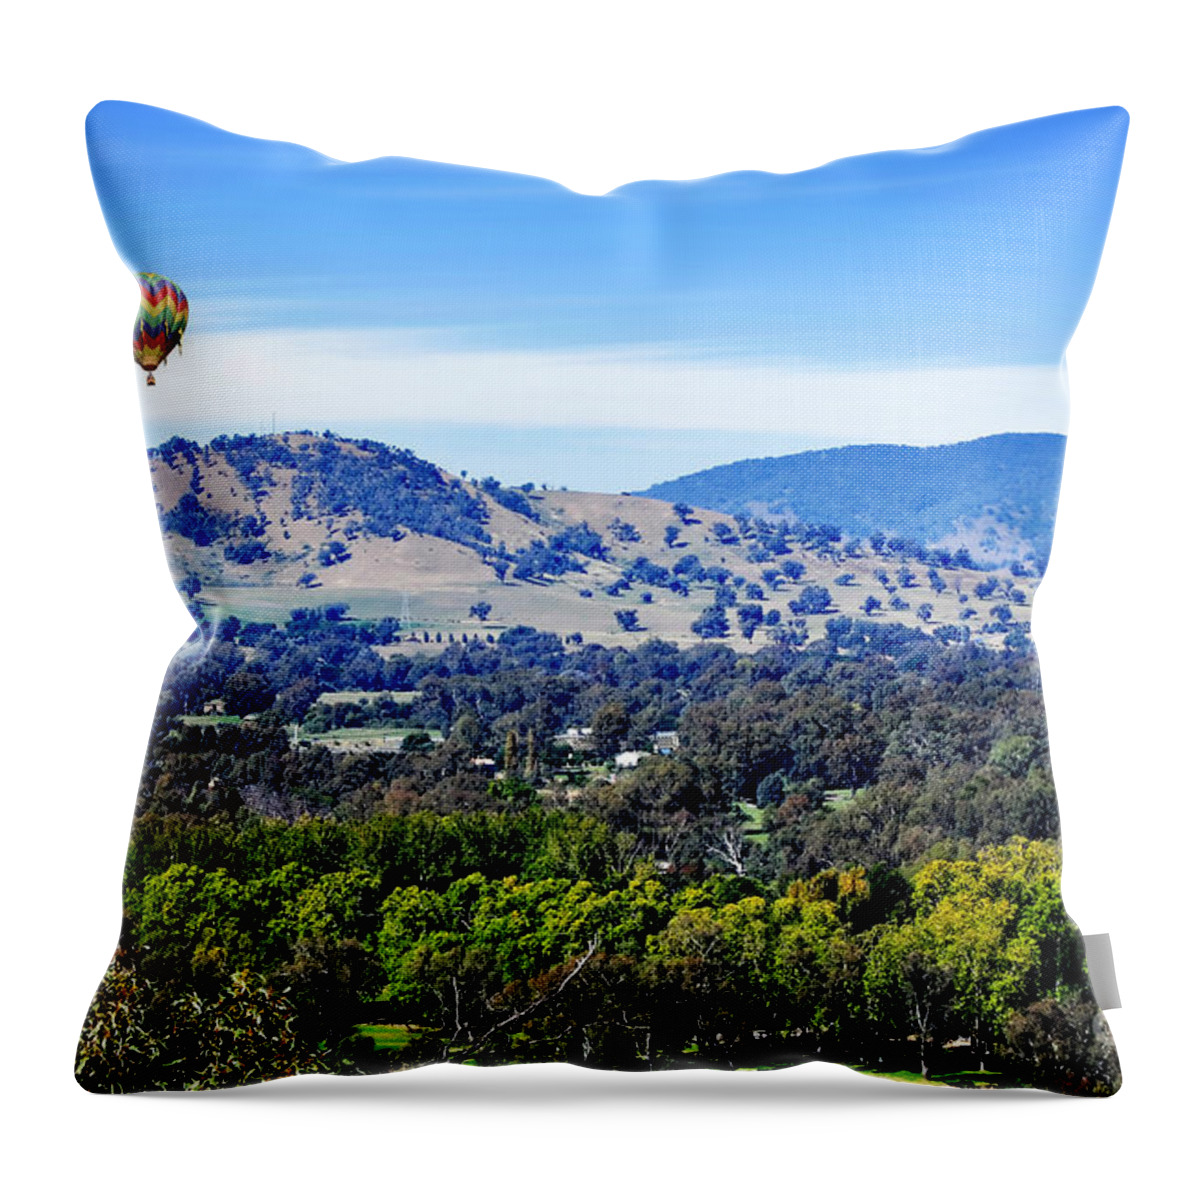 Photography Throw Pillow featuring the photograph Hills Surrounding Albury by Kaye Menner